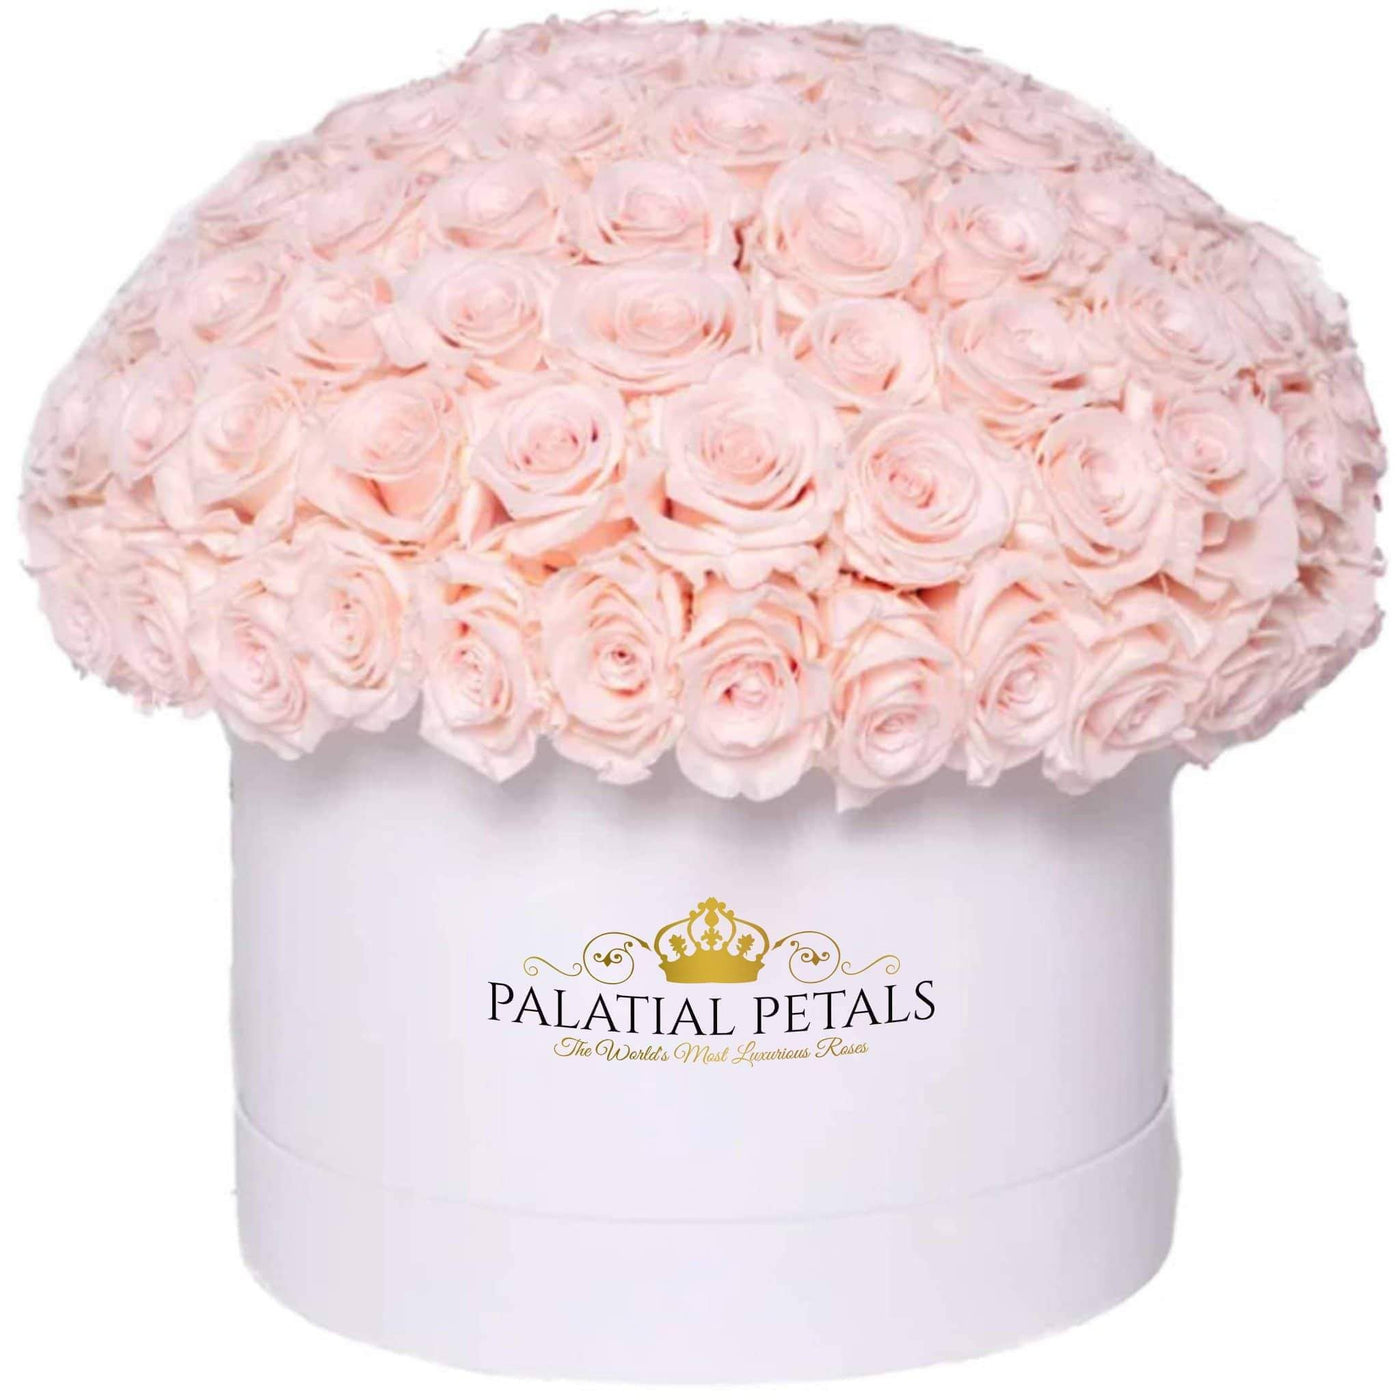 Blush Roses That Last A Year - Grande "Dome 360" Rose Box